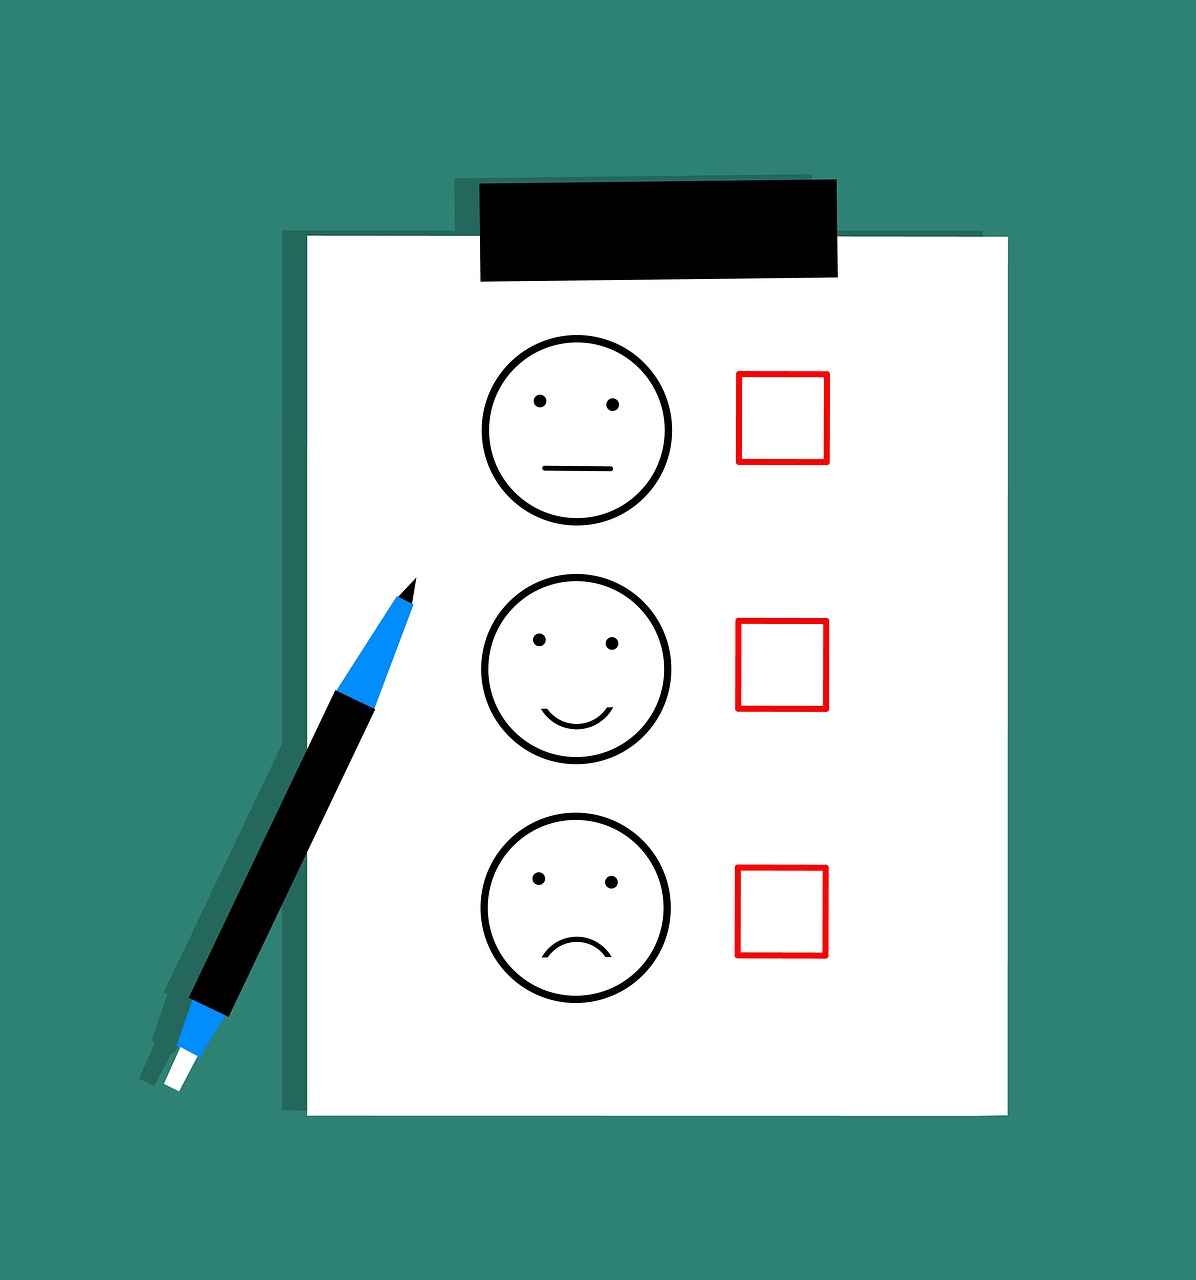 Illustration of a survey with neutral face, happy face, and sad face